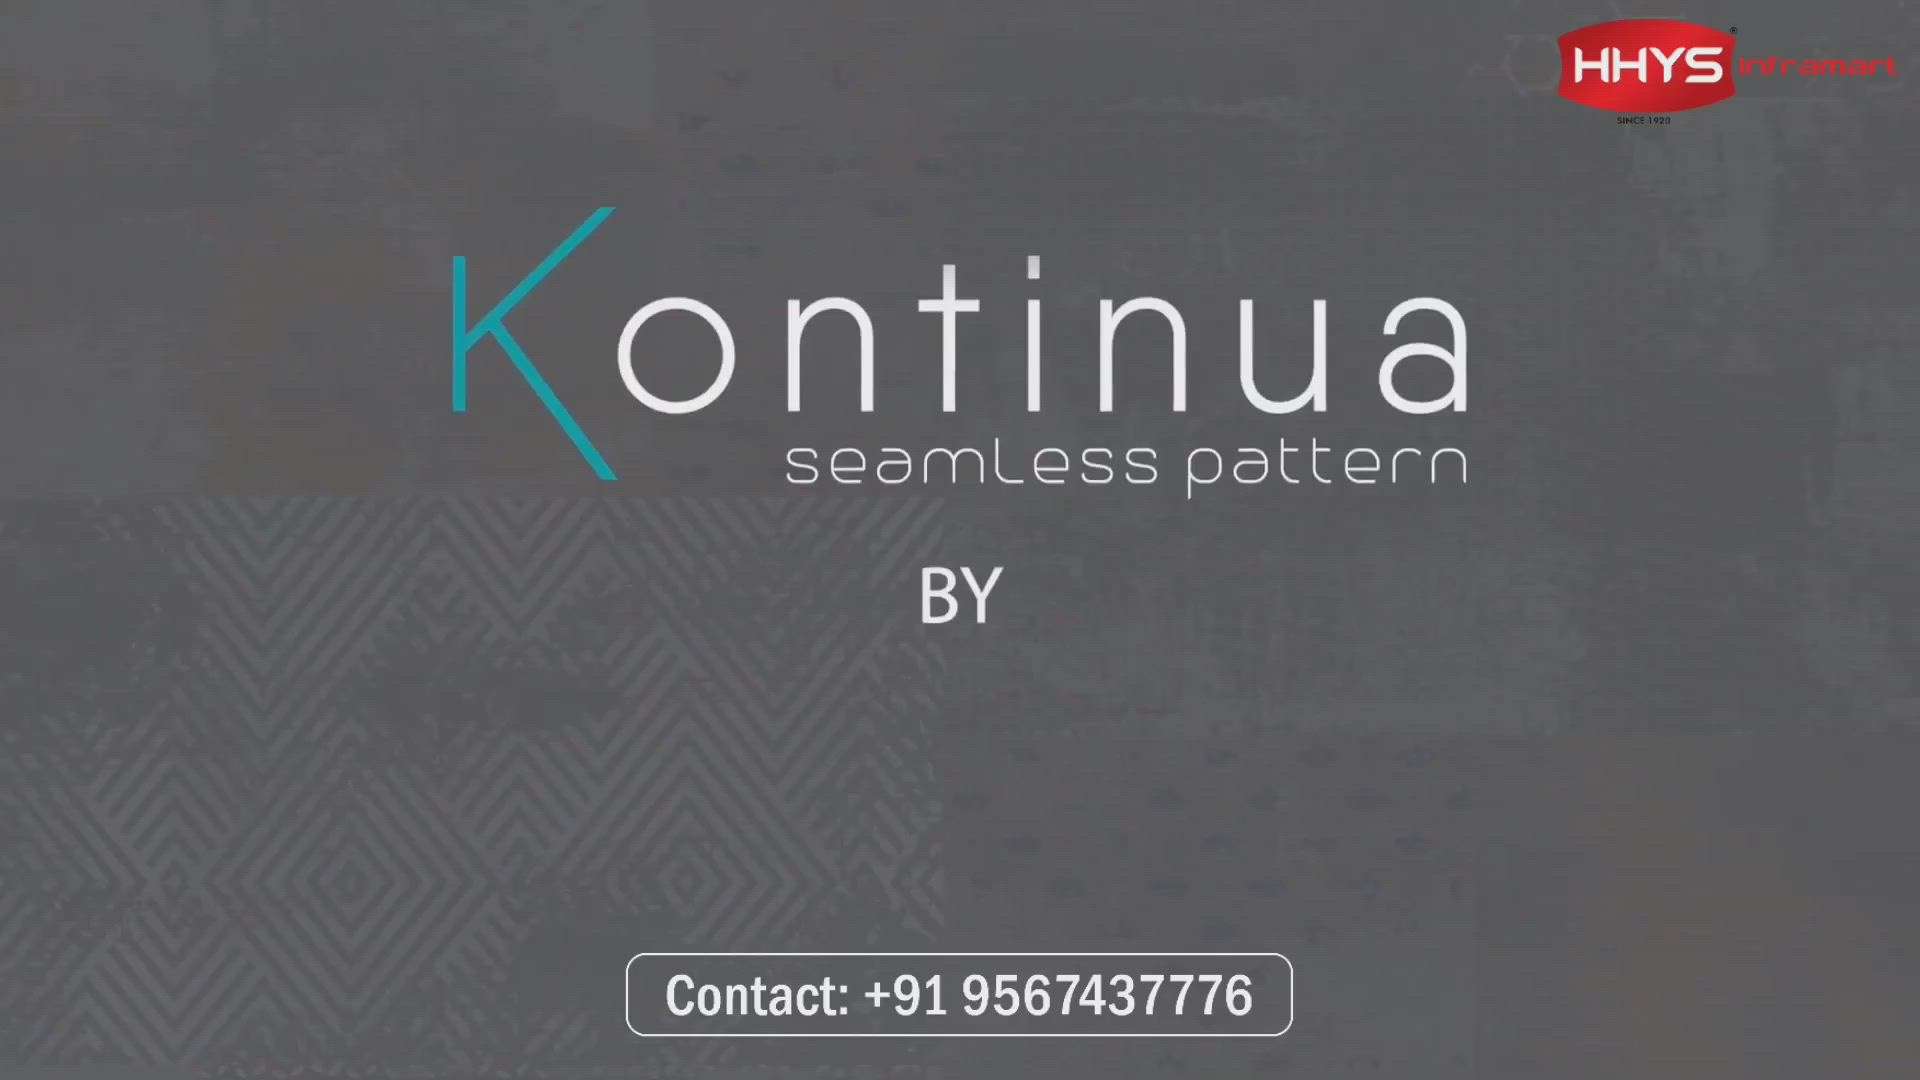 ✅ Kontinua Collection (Seamless Pattern) by Qutone

The KONTINUA Collection (Seamless Pattern) from Qutone is known for its design fluidity. The Designs are written to provide continuous flow in each of the Faces, causing them to intersect with one another, providing harmonic simulation for your surfaces and unequalled flexibility for any application.

Visit our HHYS Inframart showroom in Kayamkulam for more details.

𝖧𝖧𝖸𝖲 𝖨𝗇𝖿𝗋𝖺𝗆𝖺𝗋𝗍
𝖬𝗎𝗄𝗄𝖺𝗏𝖺𝗅𝖺 𝖩𝗇 , 𝖪𝖺𝗒𝖺𝗆𝗄𝗎𝗅𝖺𝗆
𝖠𝗅𝖾𝗉𝗉𝖾𝗒 - 690502

Call us for more Details :
+91 95674 37776.

✉️ info@hhys.in

🌐 https://hhys.in/

✔️ Whatsapp Now : https://wa.me/+919567437776

#hhys #hhysinframart #buildingmaterials #qutone